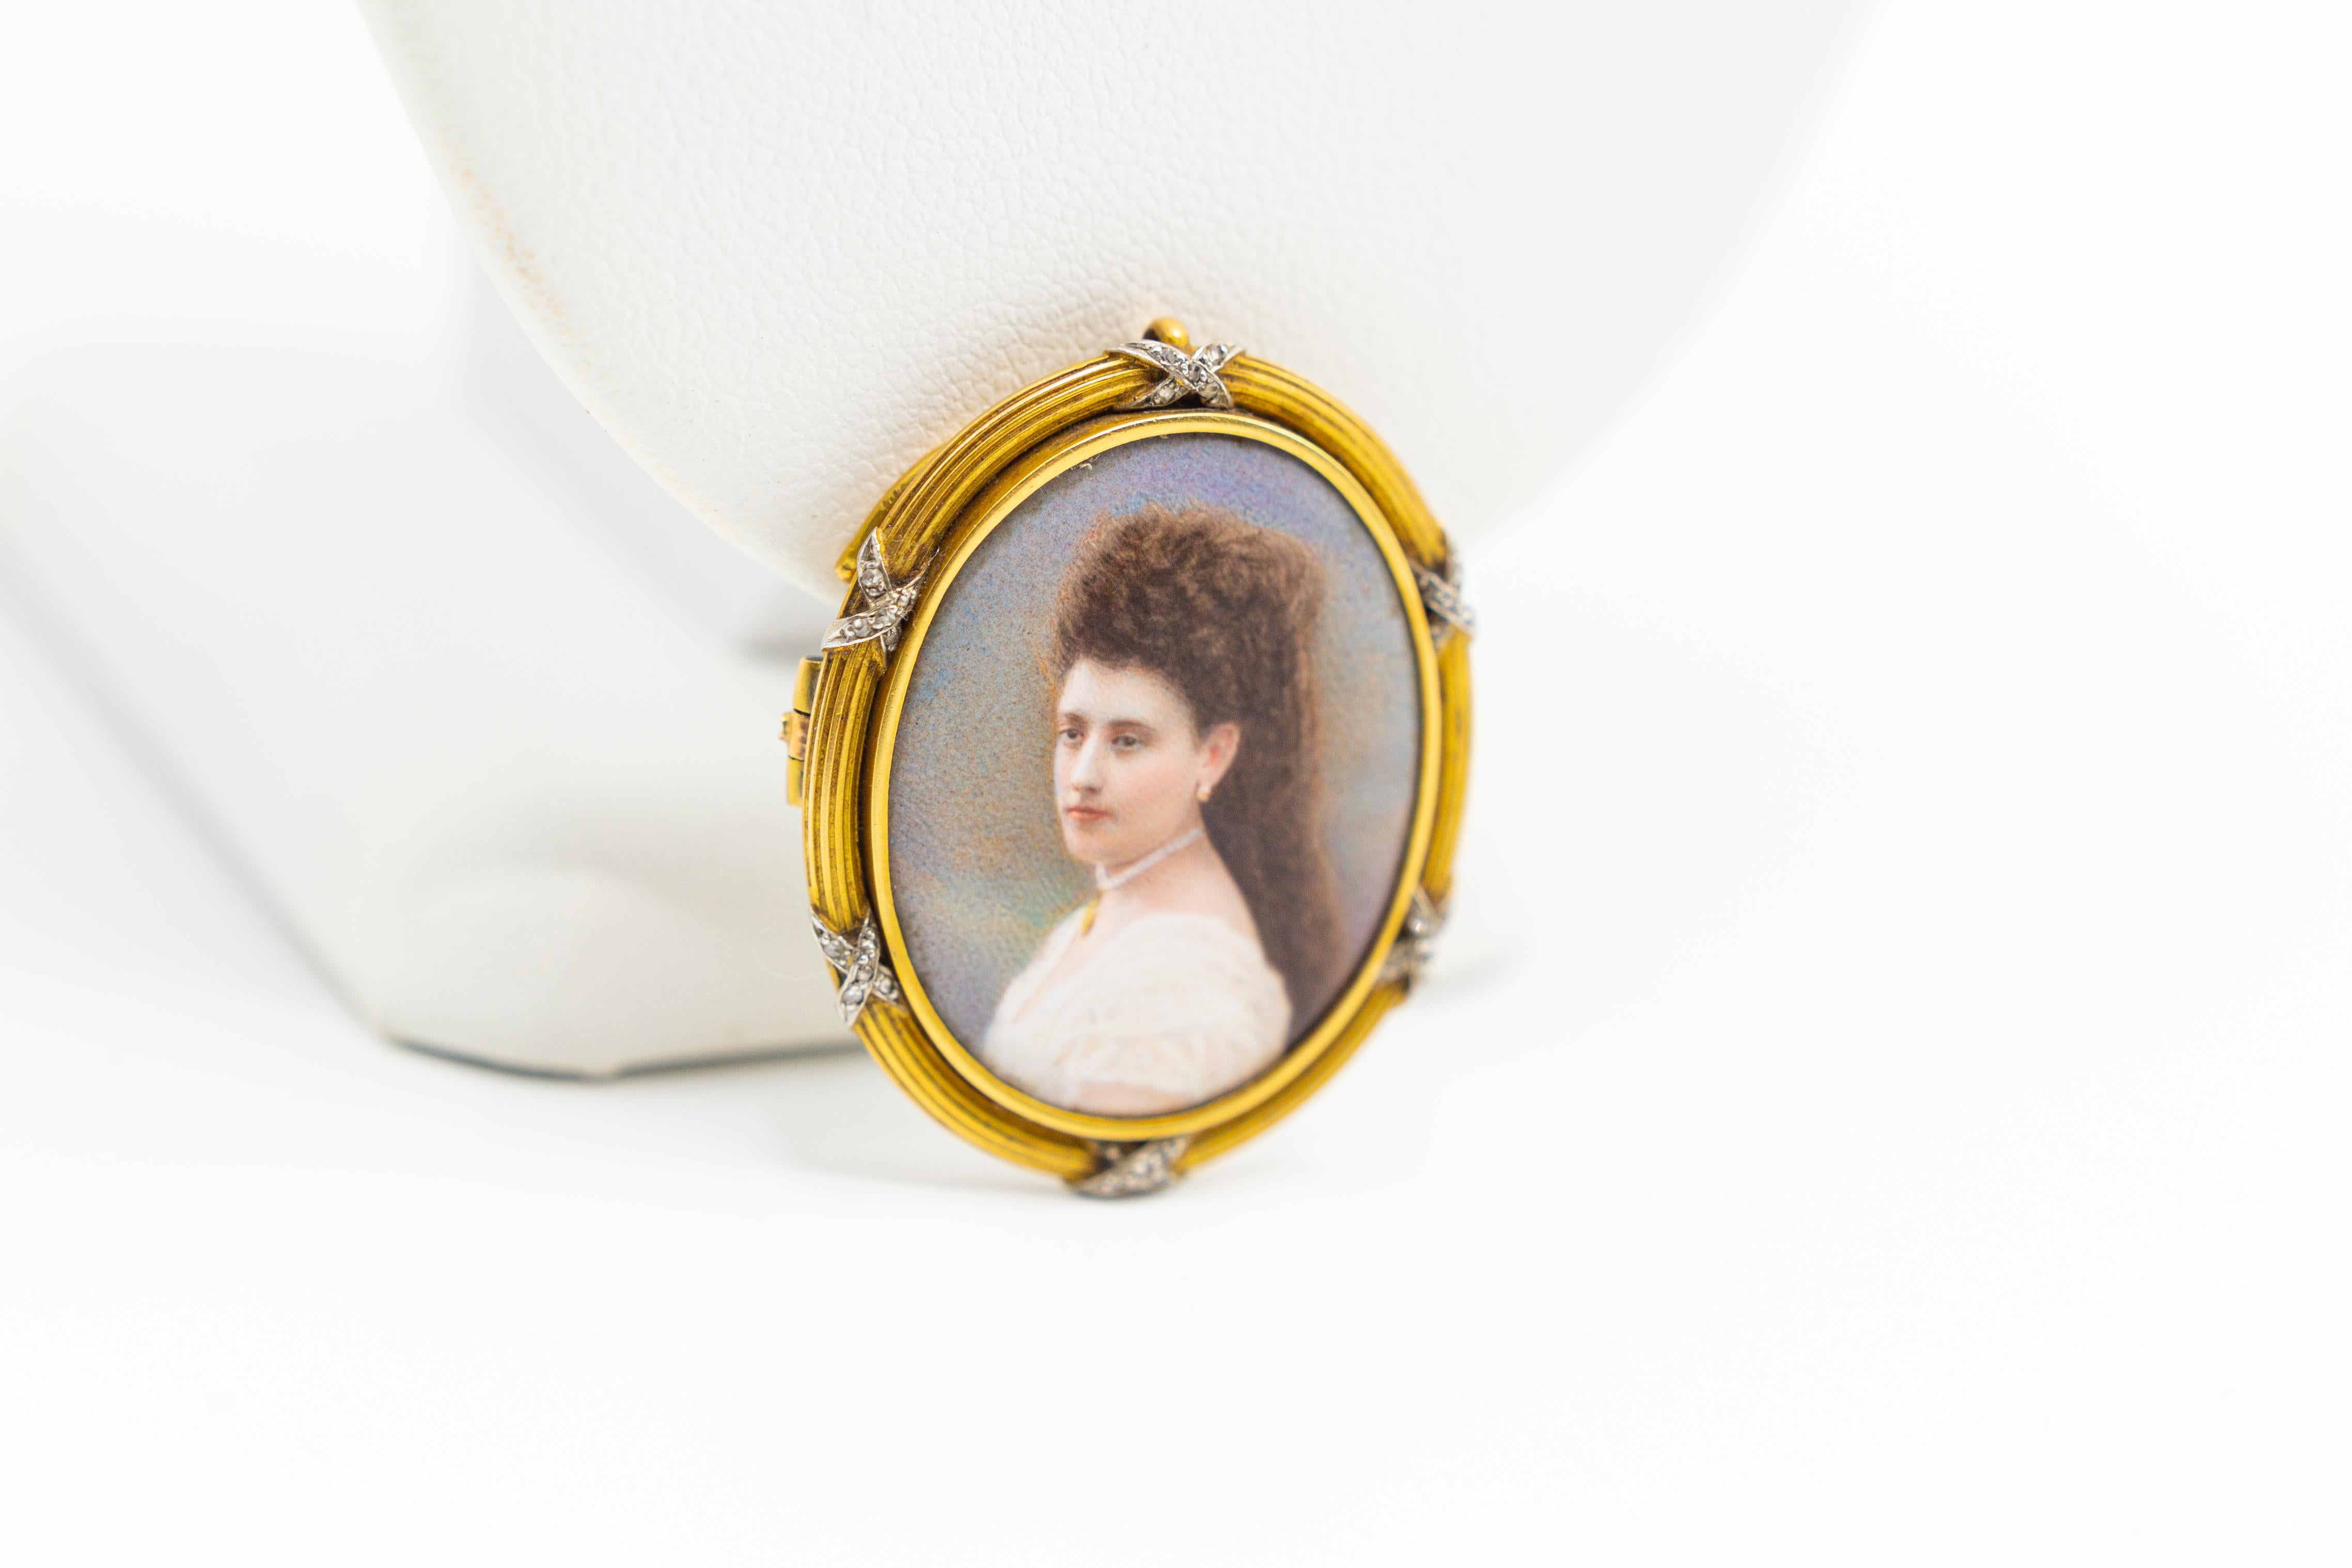 Antique Exceptional High Quality Miniature Portrait Painting Brooch In Good Condition For Sale In Houston, TX